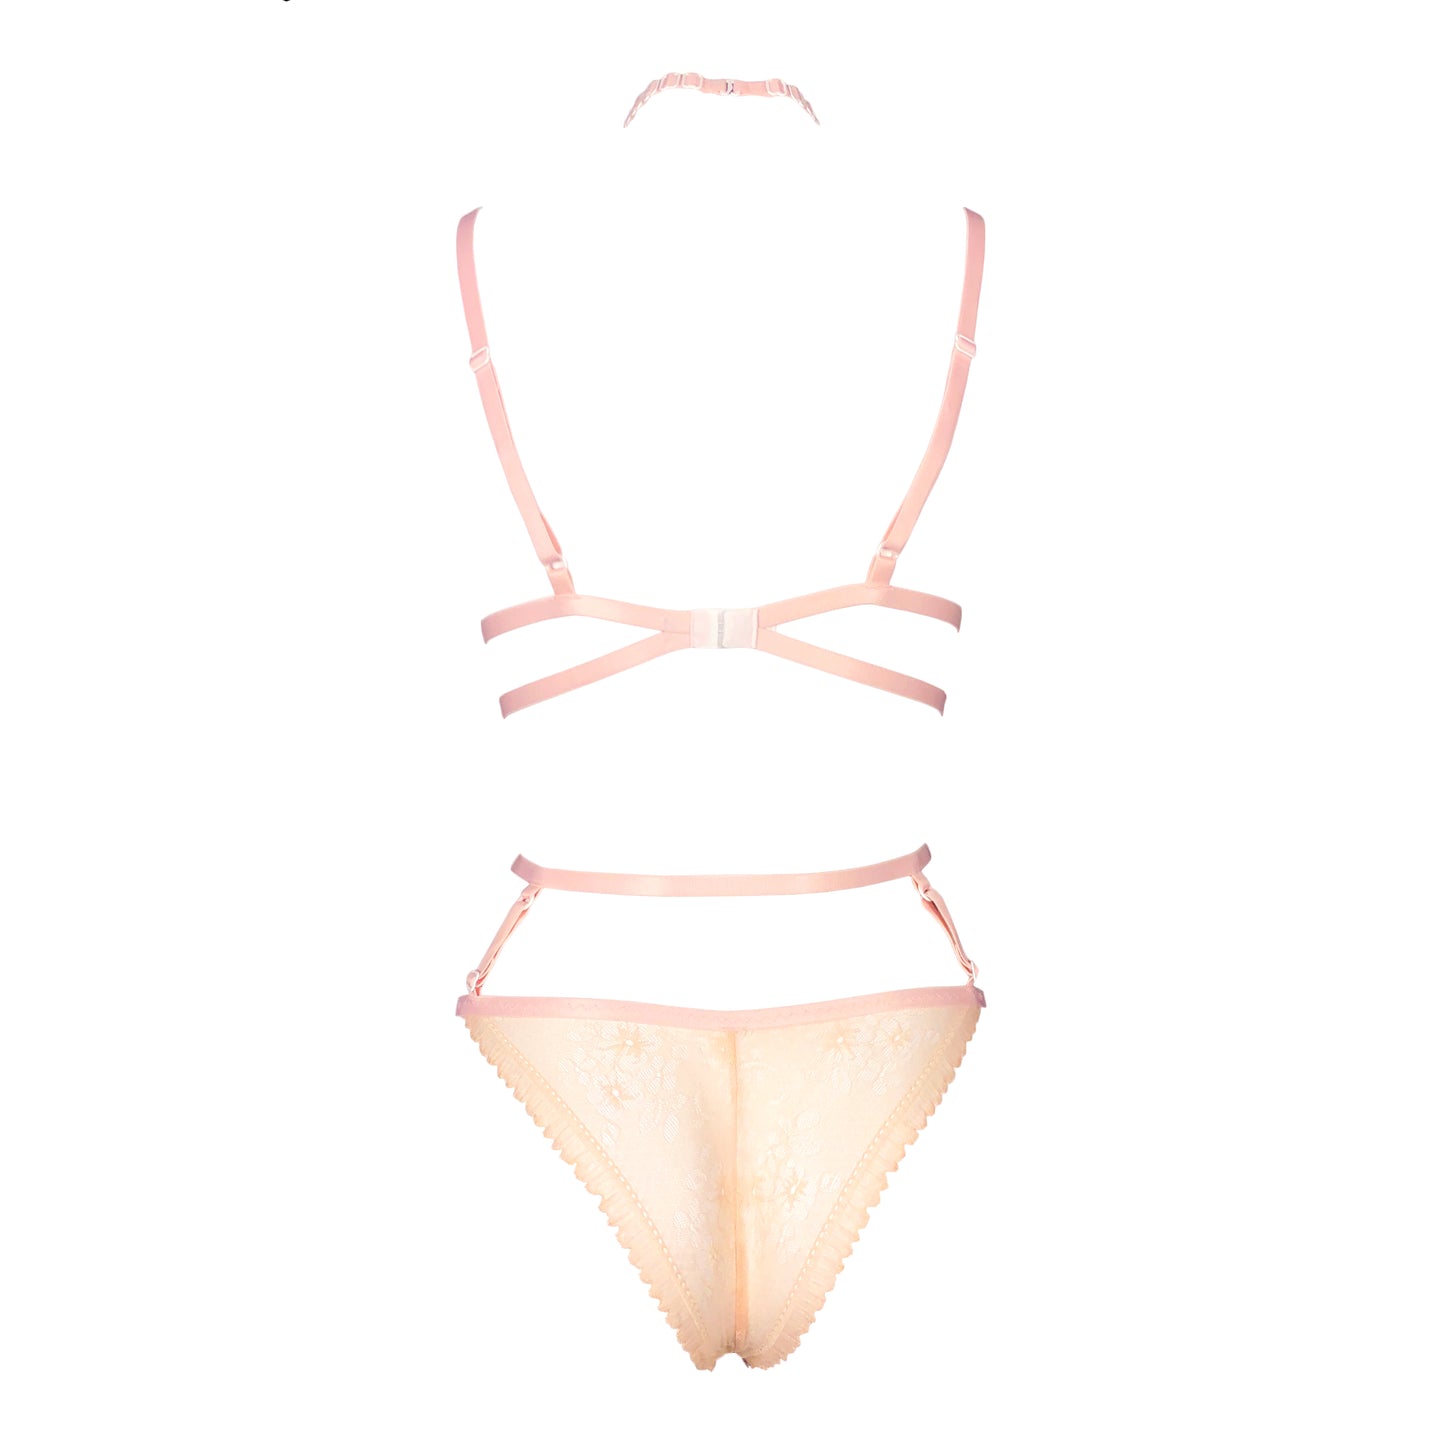 Grace lace lingerie set in baby pink